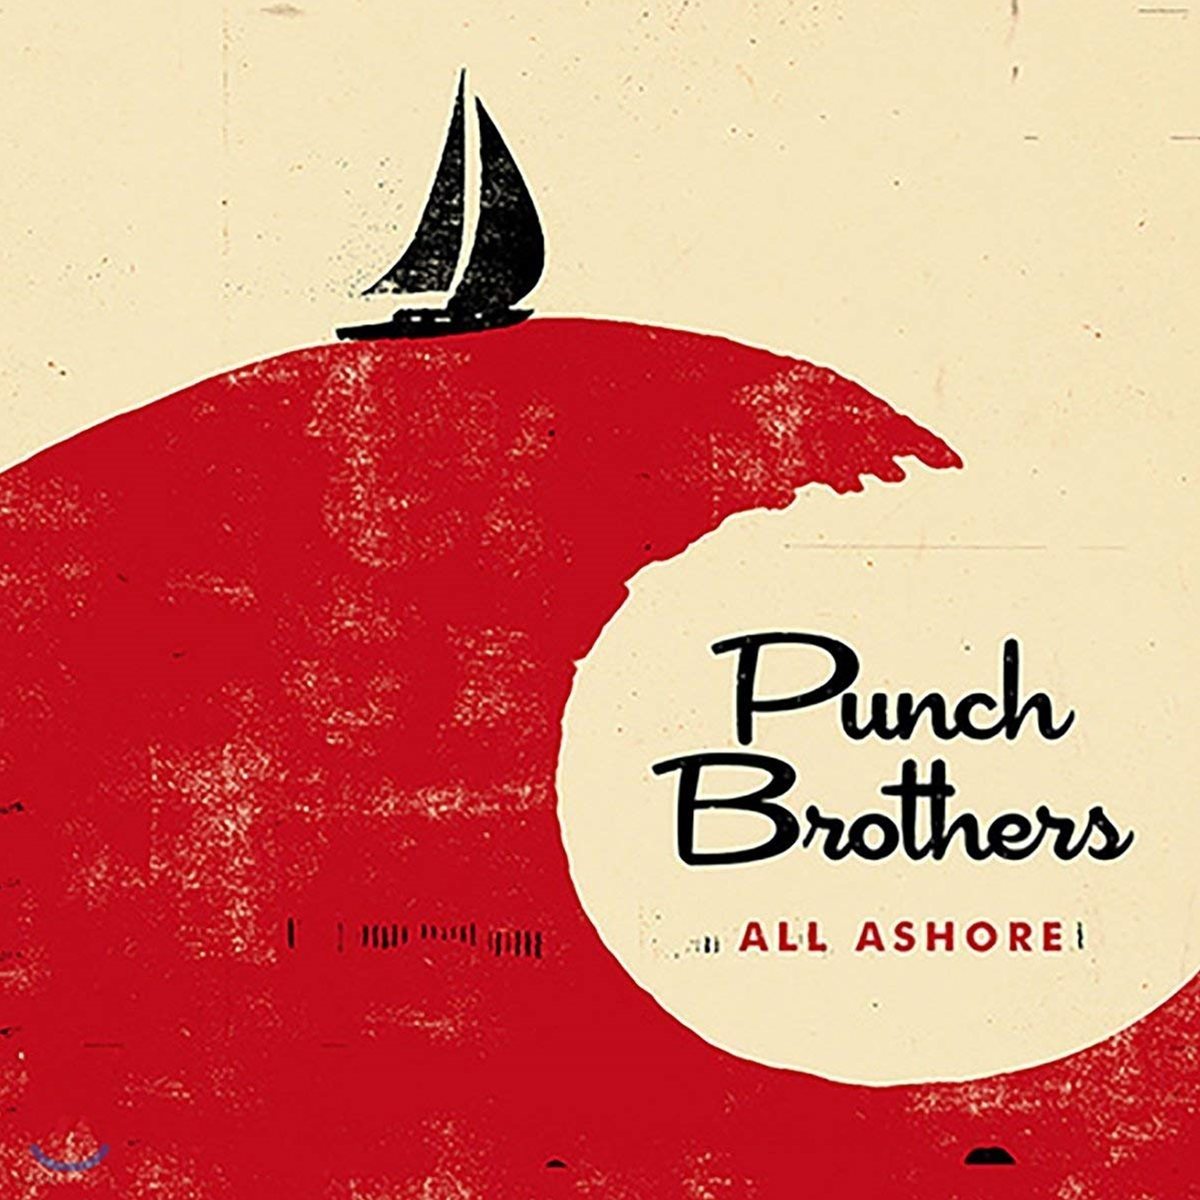 Punch Brothers  (펀치 브라더스) - All Ashore   